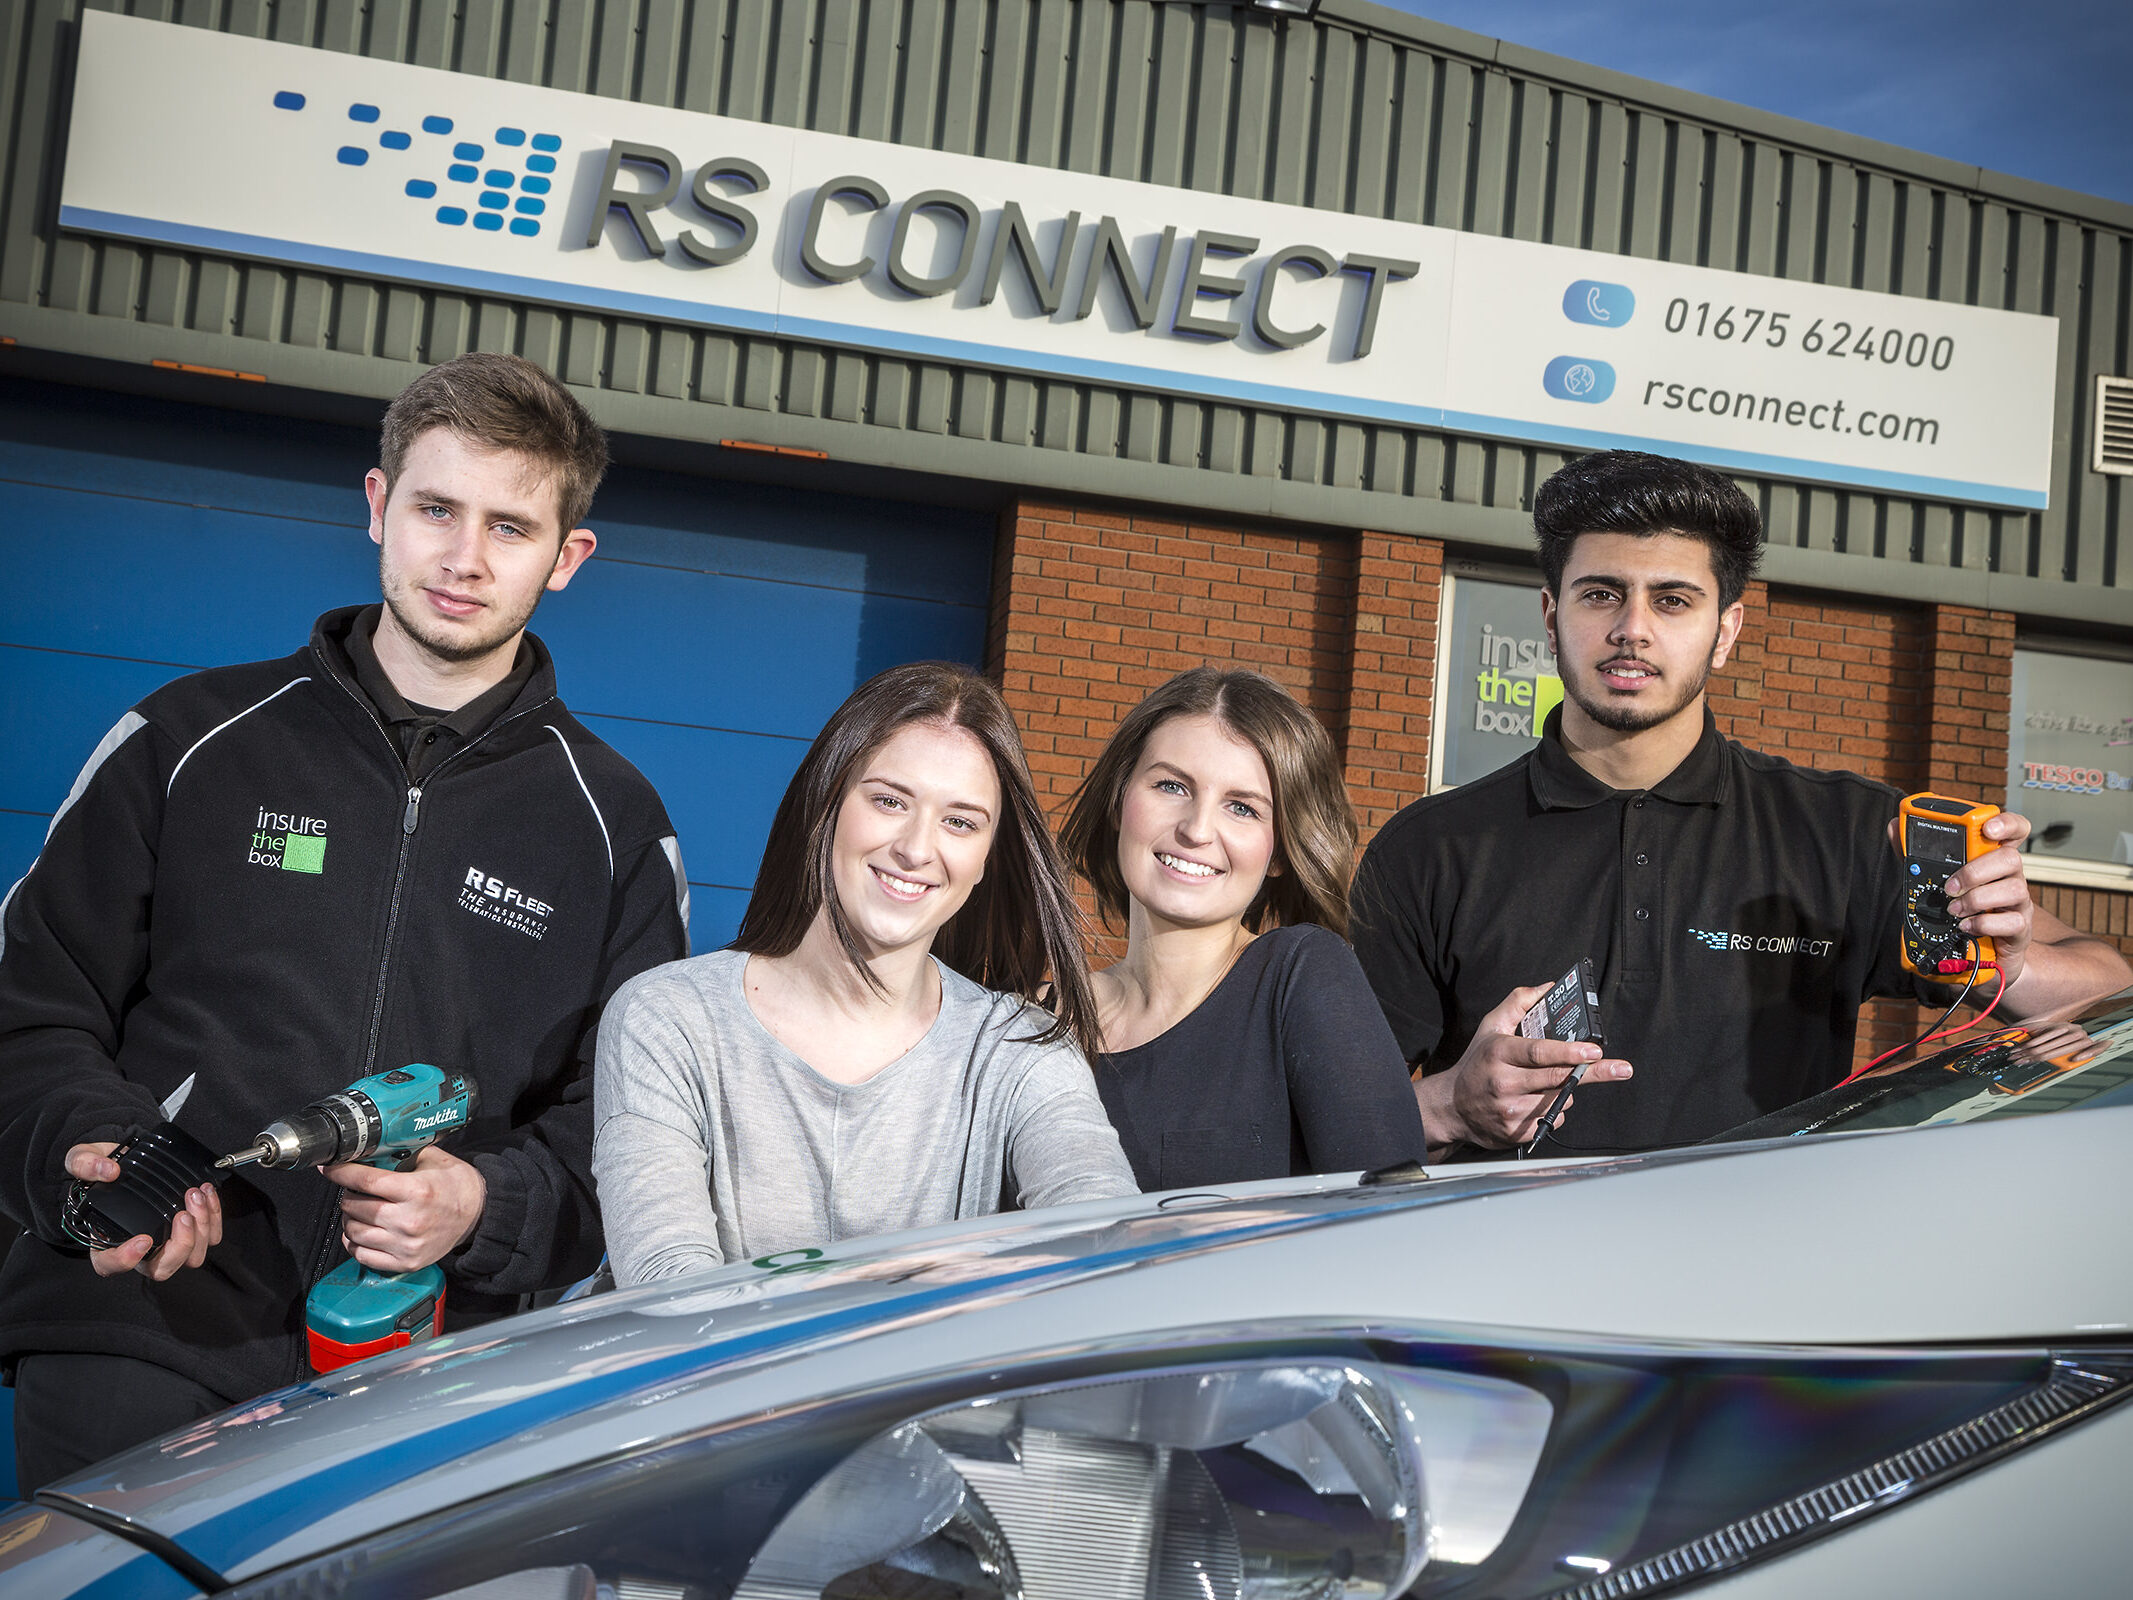 Photograph showing exterior of RS connect premises with four young people. The apprentices are holding tools to demonstrate the installations process.